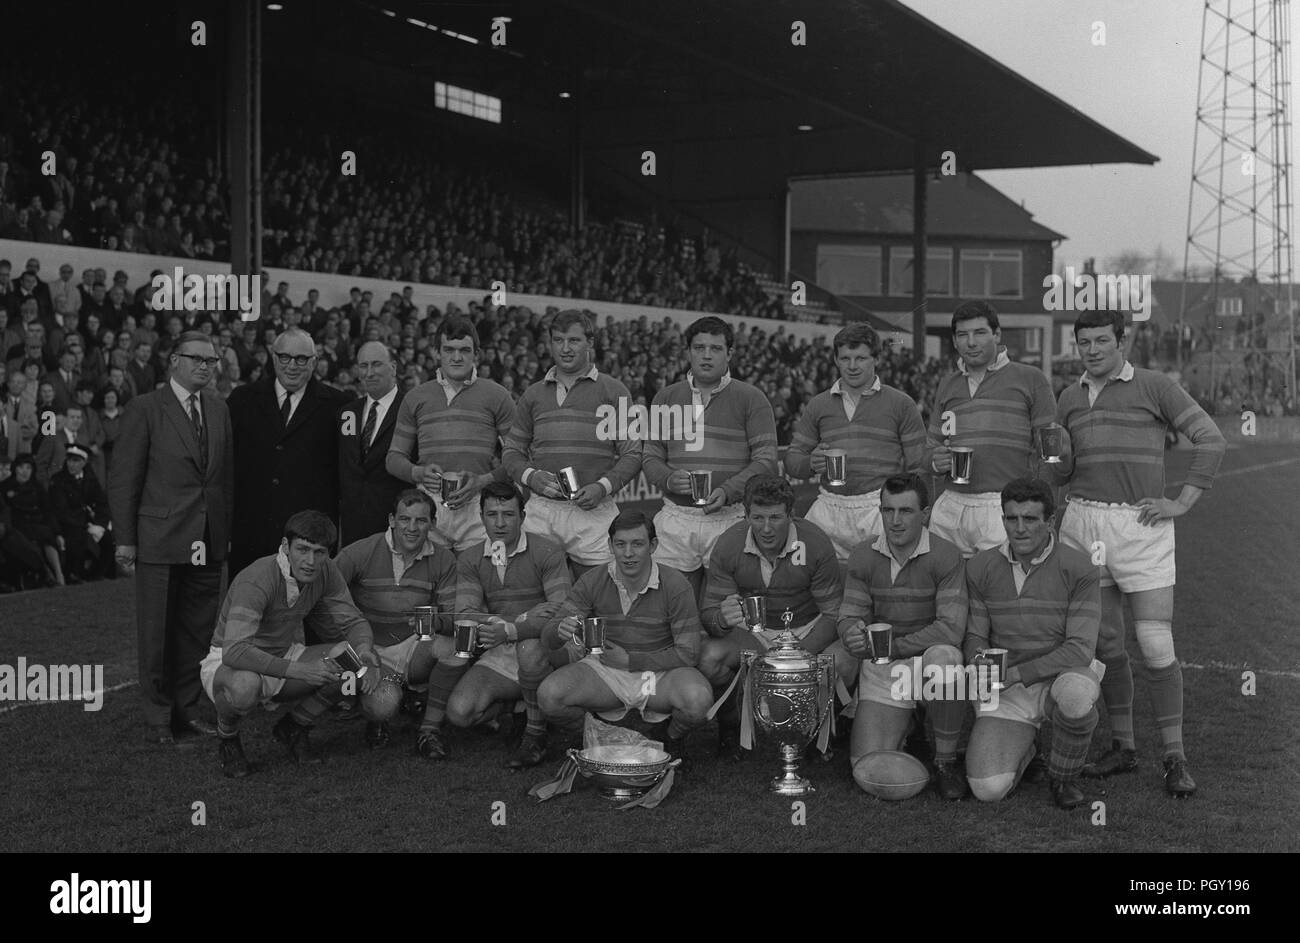 Rugby League Leeds 1950 s Stockfoto